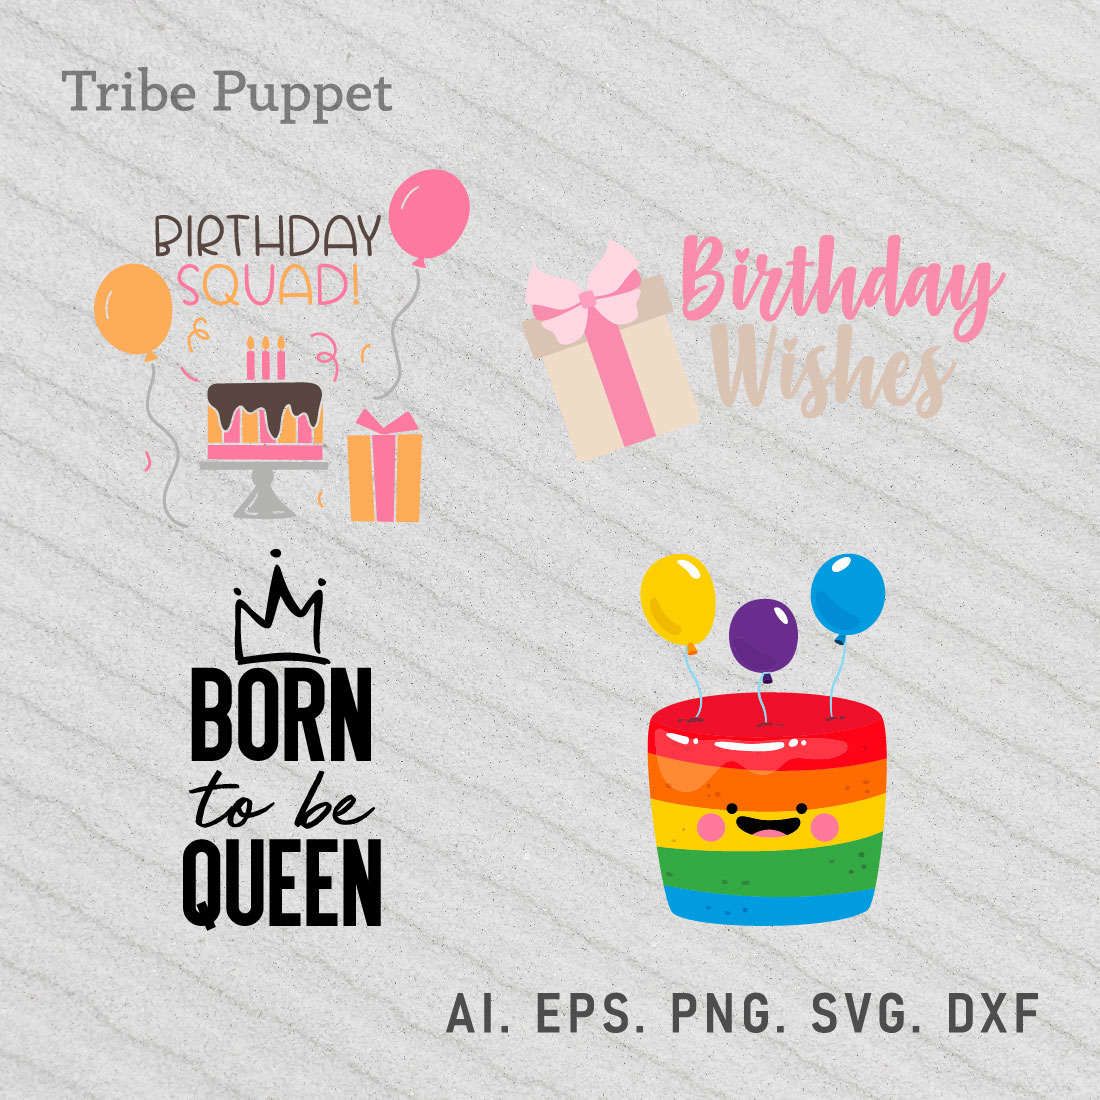 Birthday Bundle preview image.